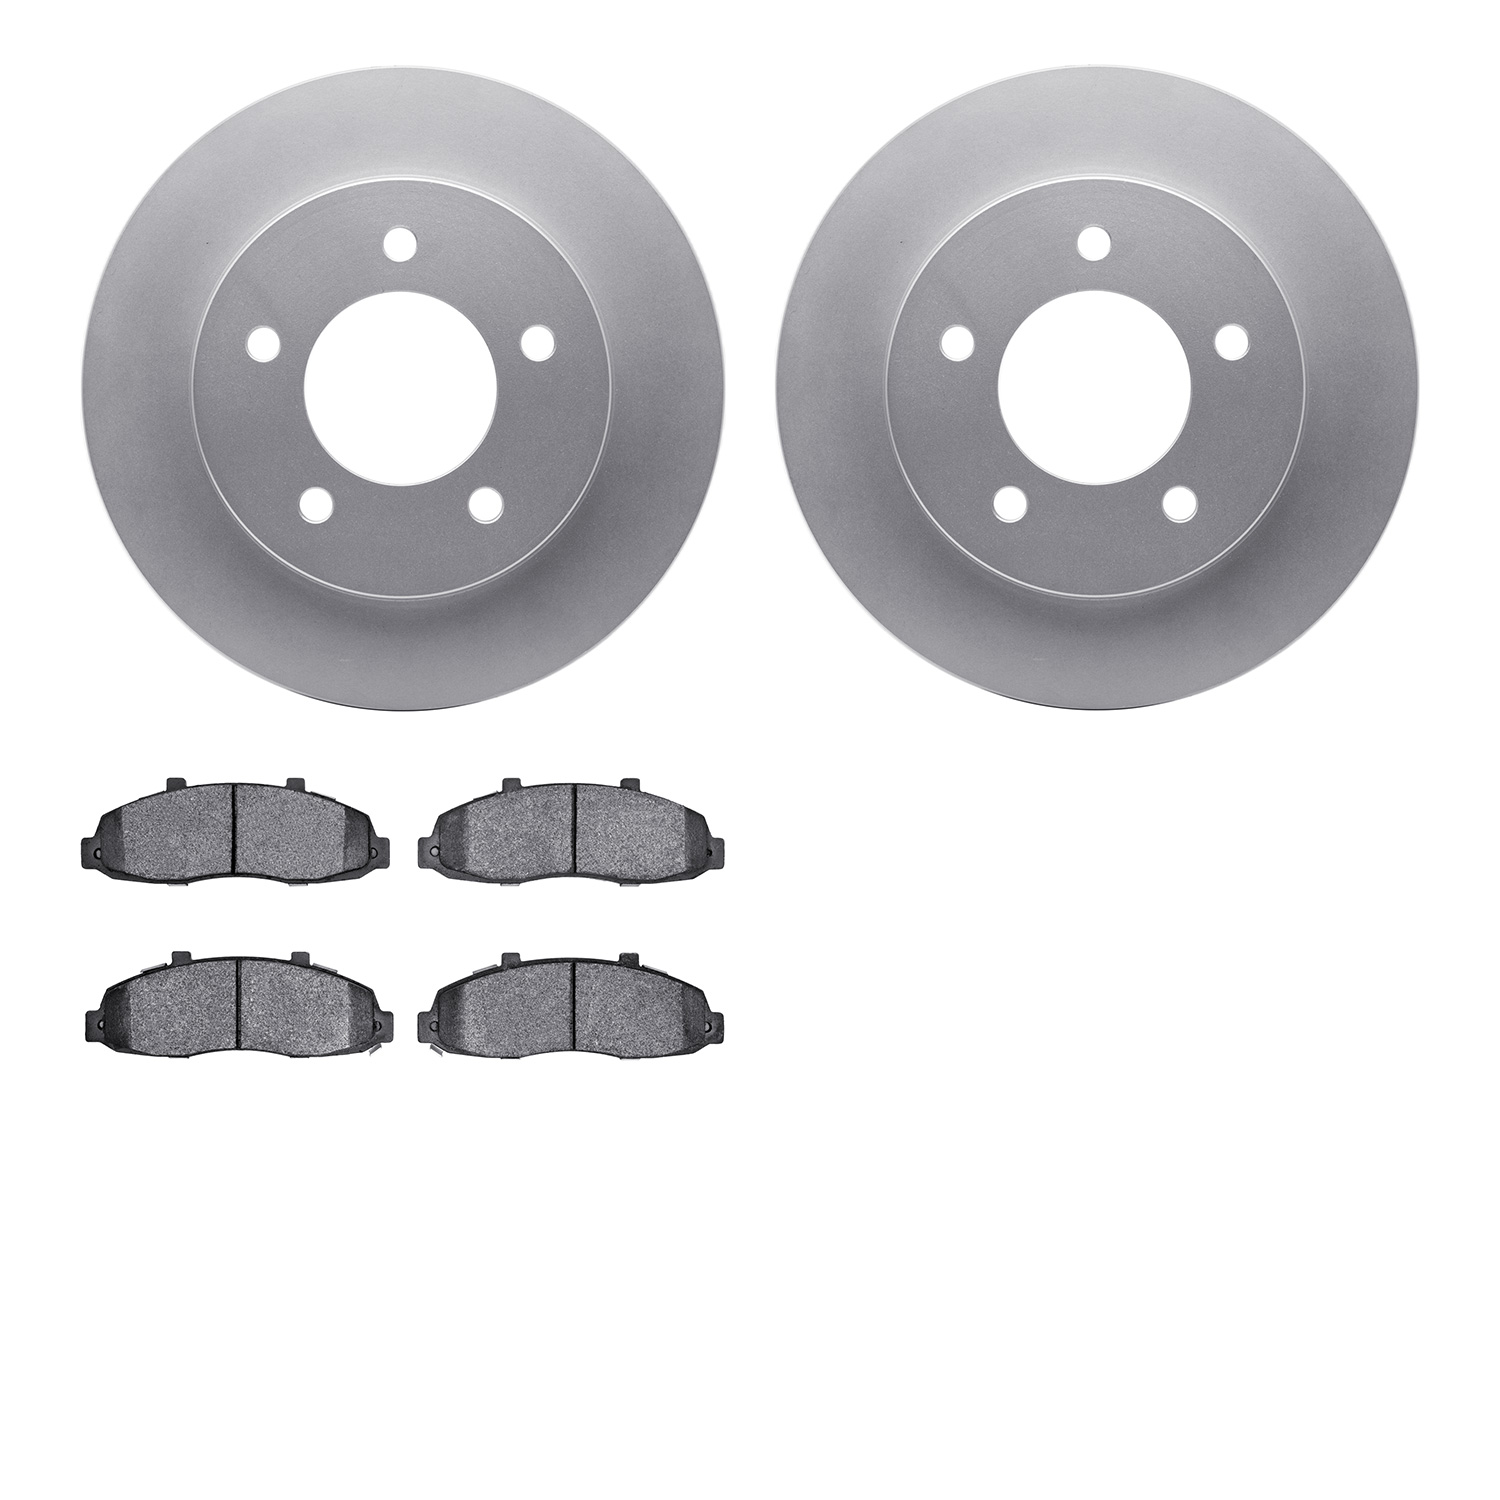 4402-54018 Geospec Brake Rotors with Ultimate-Duty Brake Pads Kit, 1997-2004 Ford/Lincoln/Mercury/Mazda, Position: Front